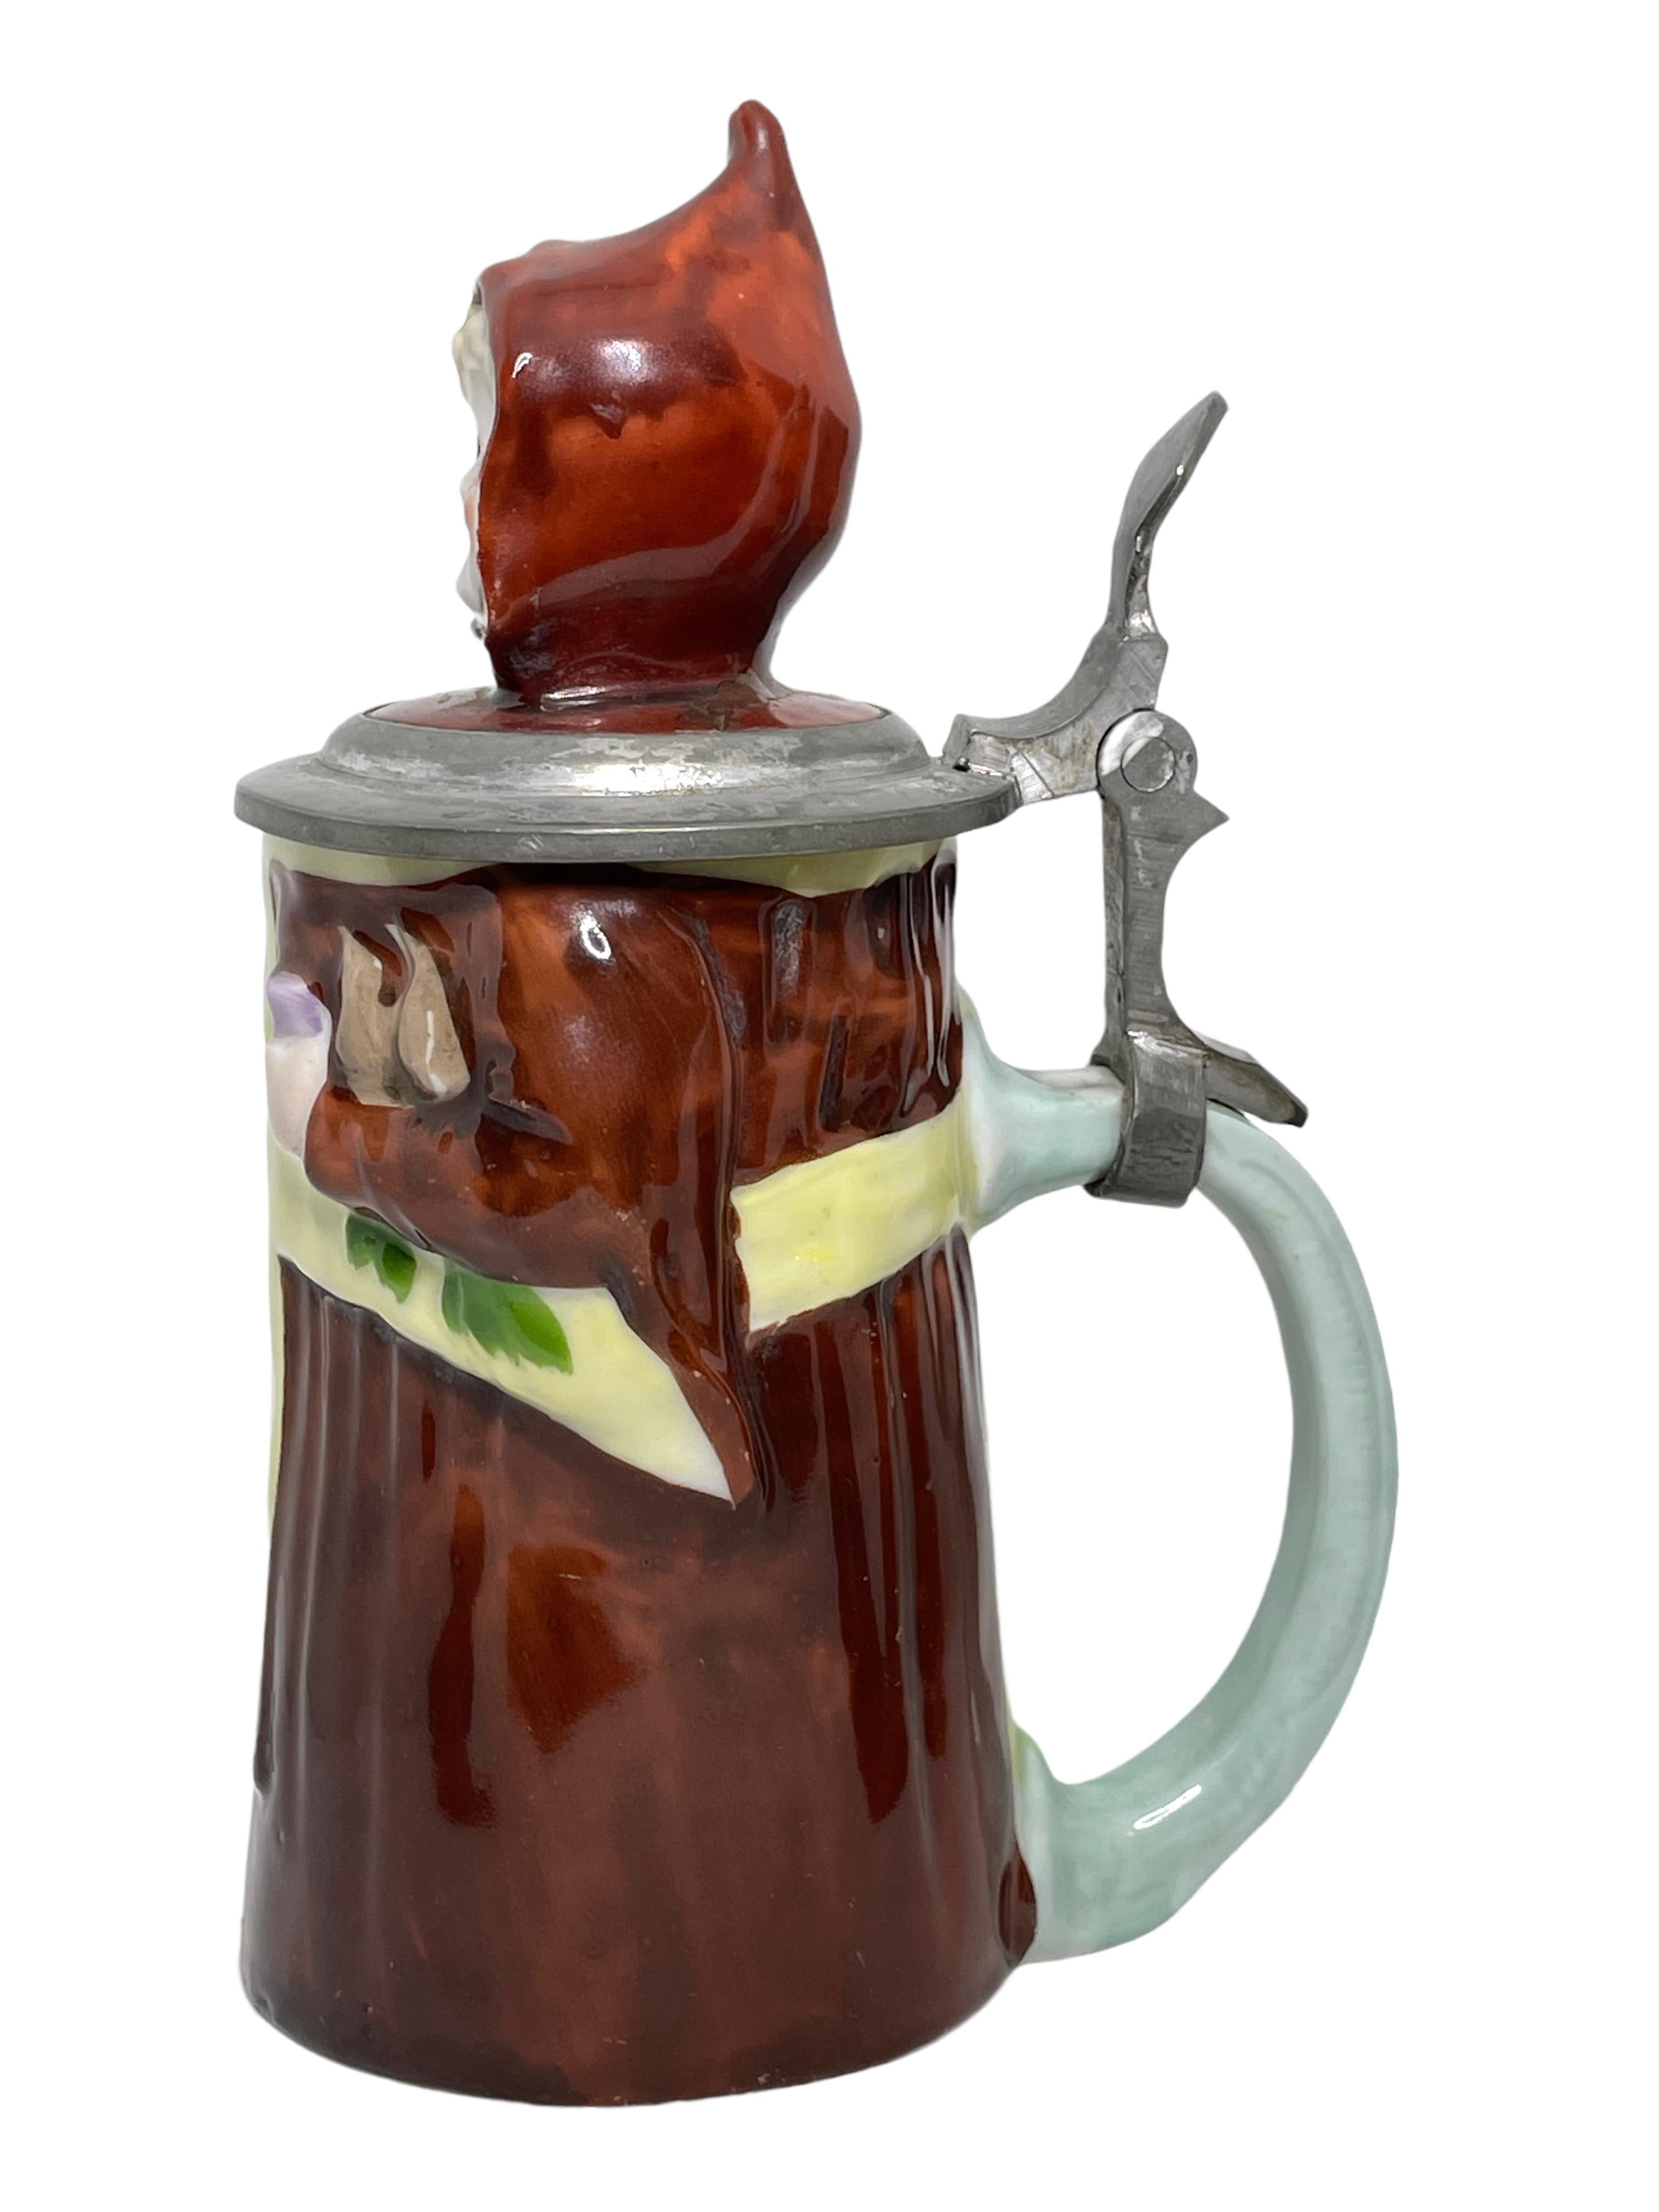 A gorgeous Character Beer Stein - Munich Child. This character beer stein has been made in Germany circa 1900s by E. Bohne, Thuringia Germany. Absolutely gorgeous piece hand painted and still in great condition. Lid works properly.